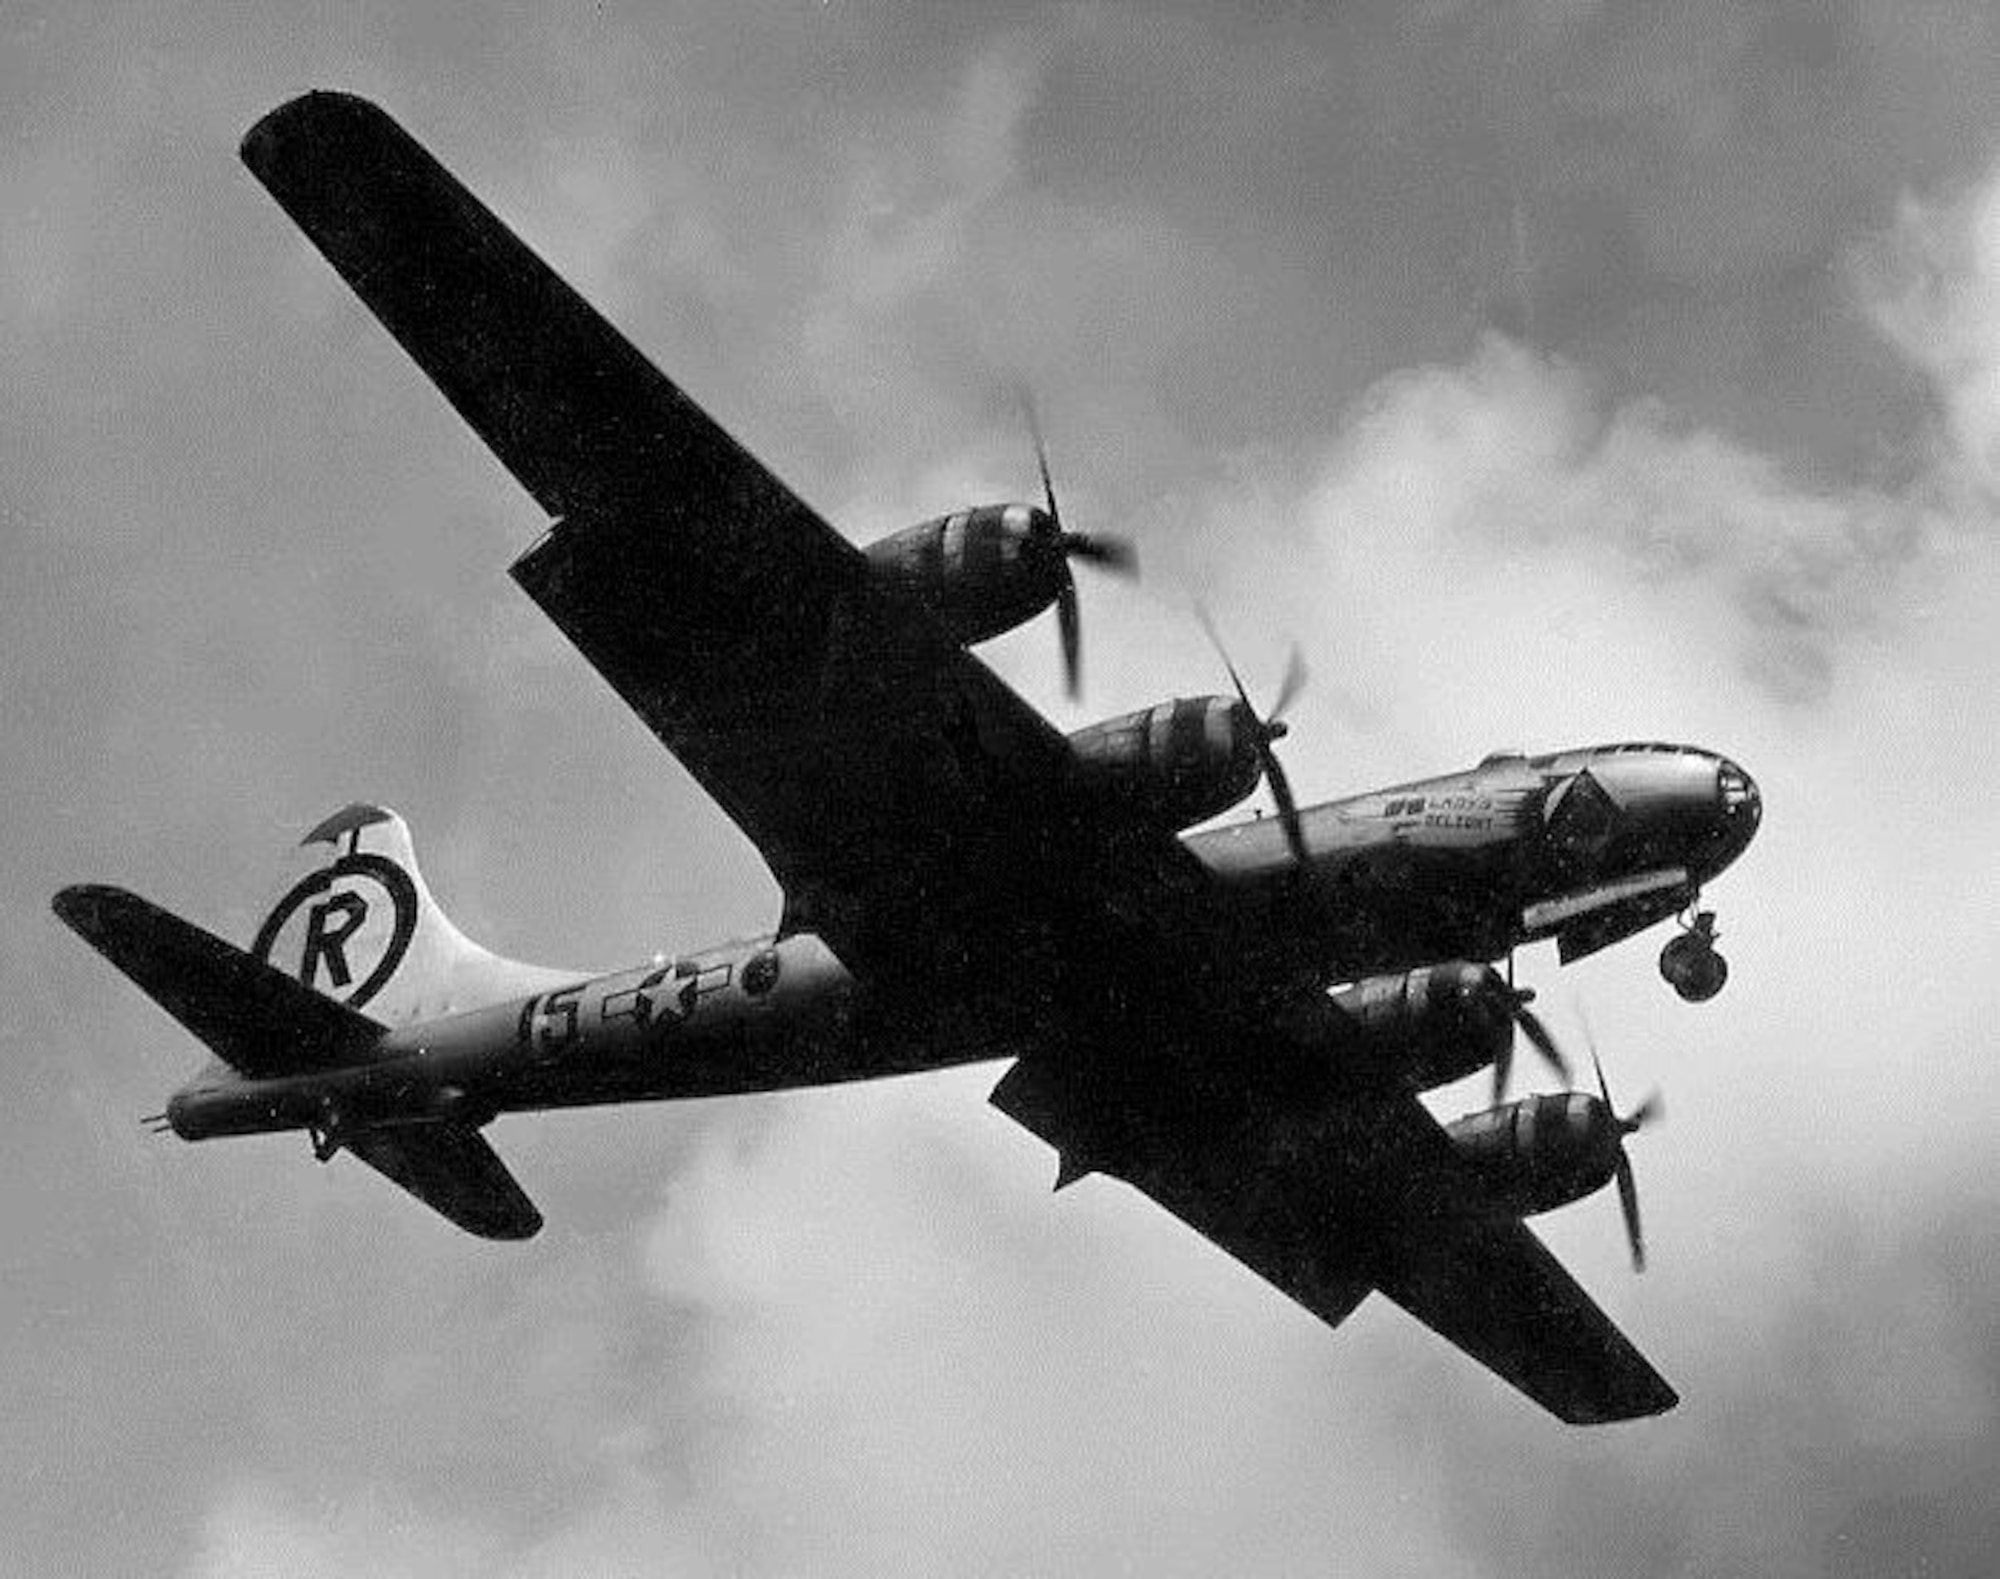 The only known photograph of 24th Bomb Squadron B-29-45-BW, serial number 42-24759, “Blind Date/Lady’s Delight” in flight.  This aircraft was named Blind Date on the left side and had a second name added later, Lady’s Delight, on the right side.  It may have been the only plane in the group to carry two names at the same time.  (Courtesy 6th Bomb Group Association)